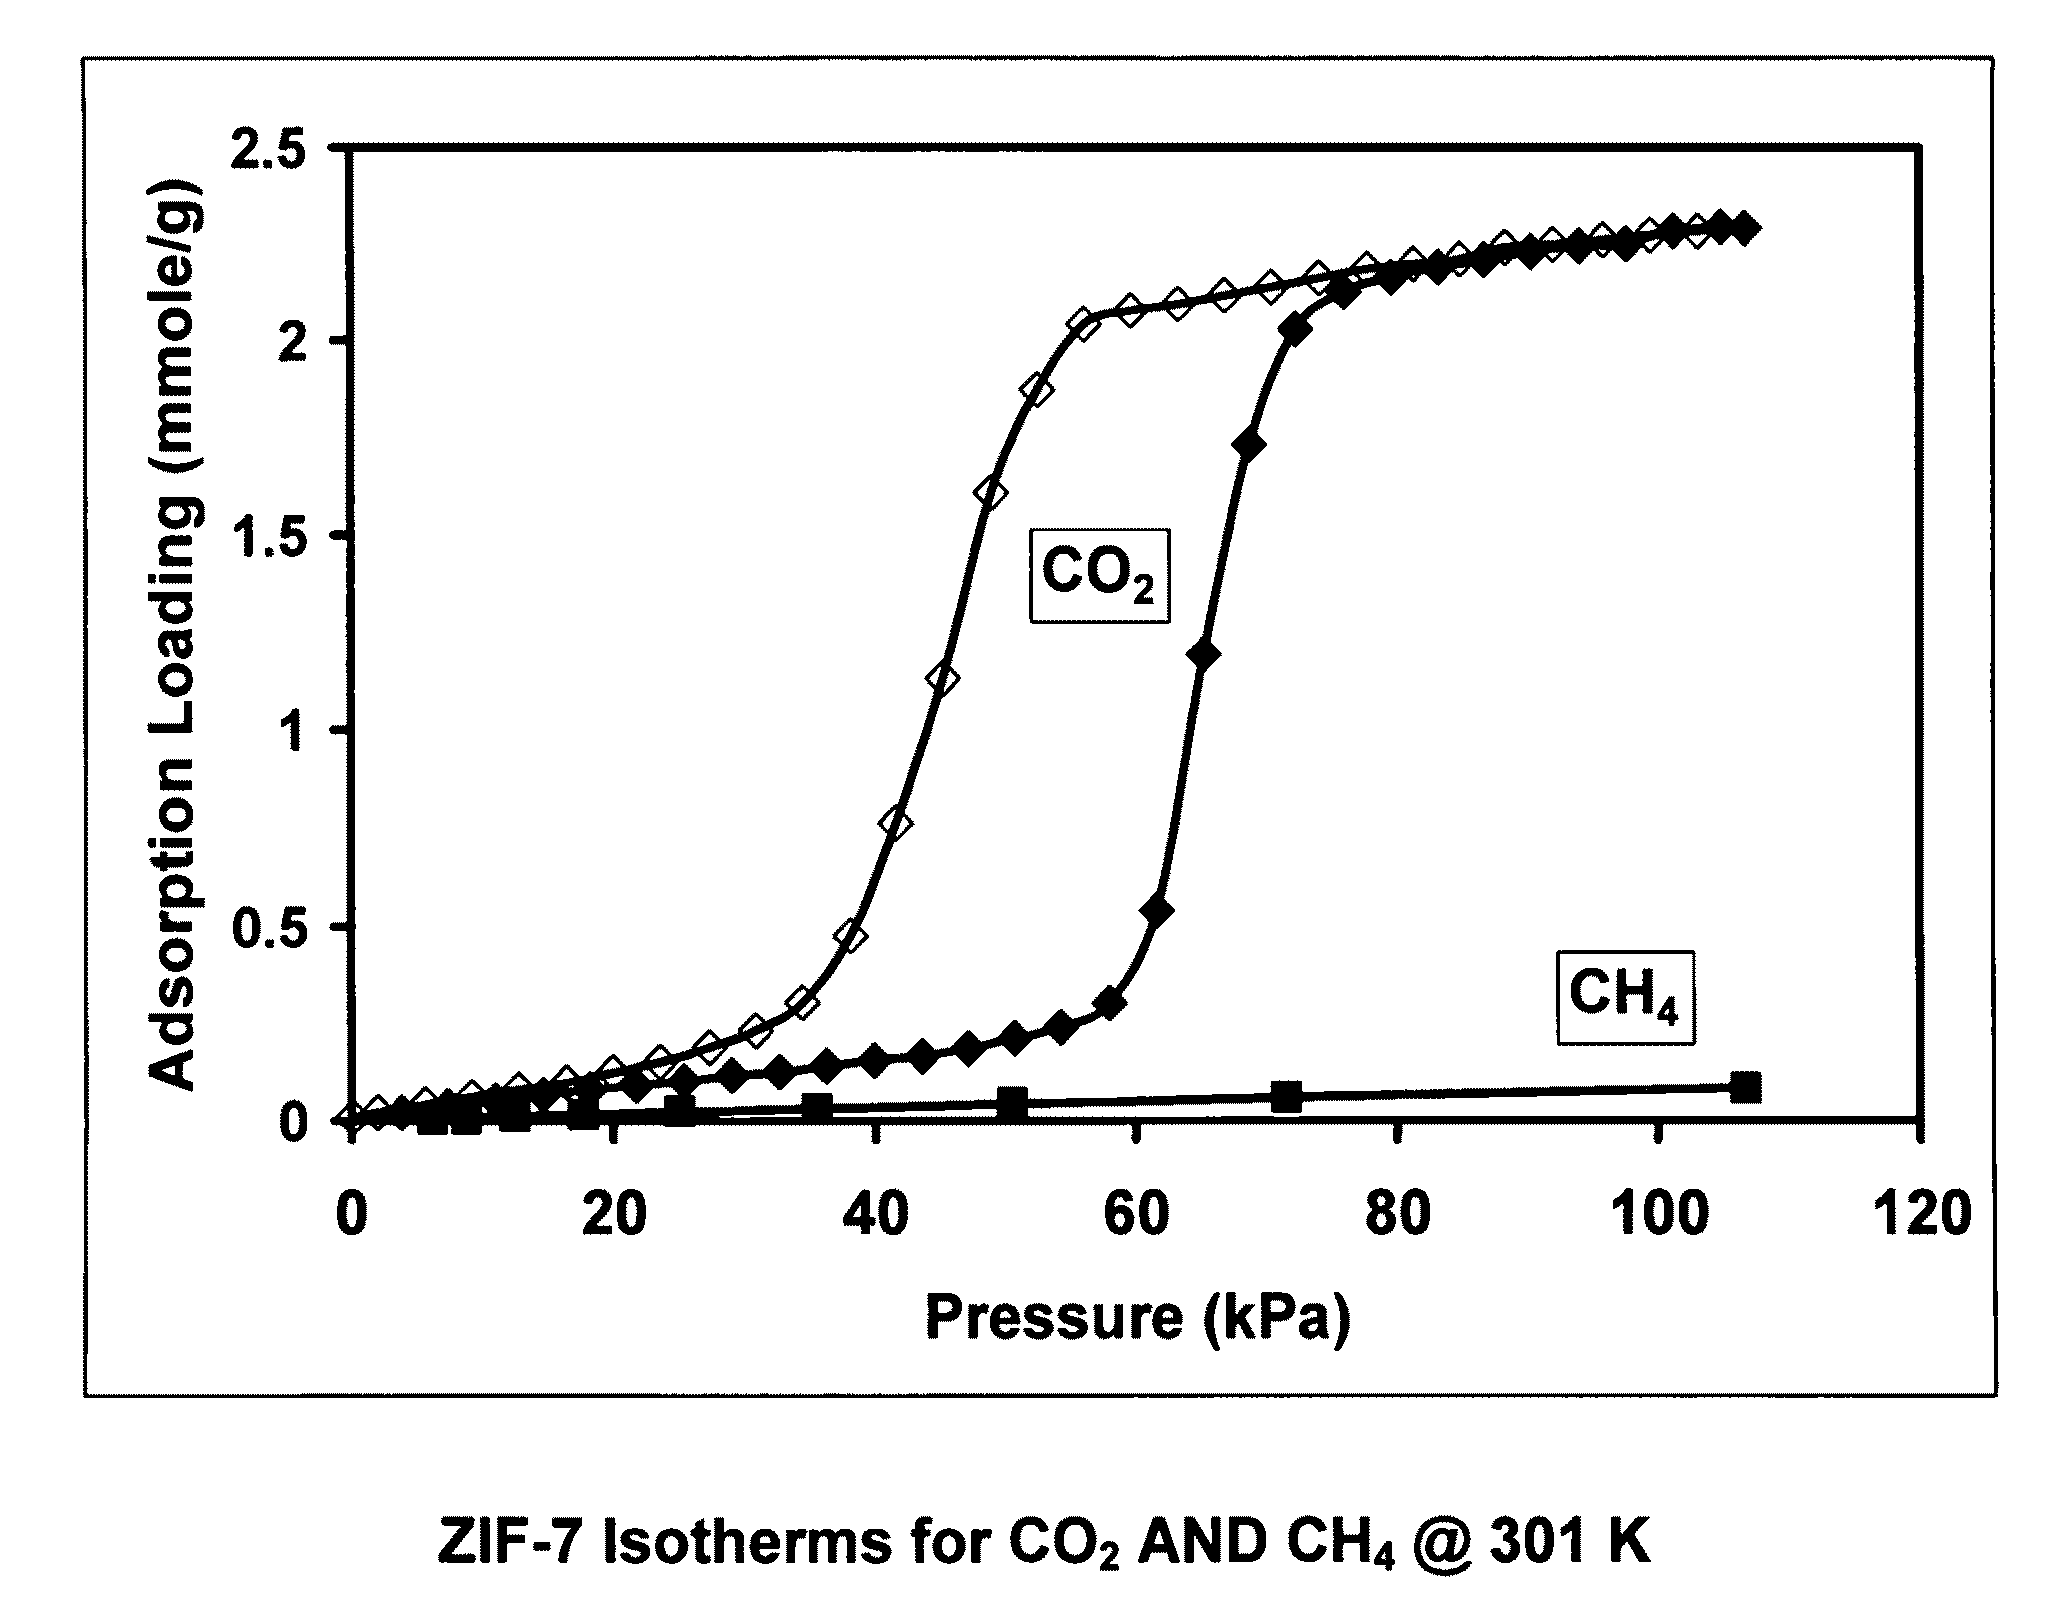 Separation of carbon dioxide from methane utilizing zeolitic imidazolate framework materials